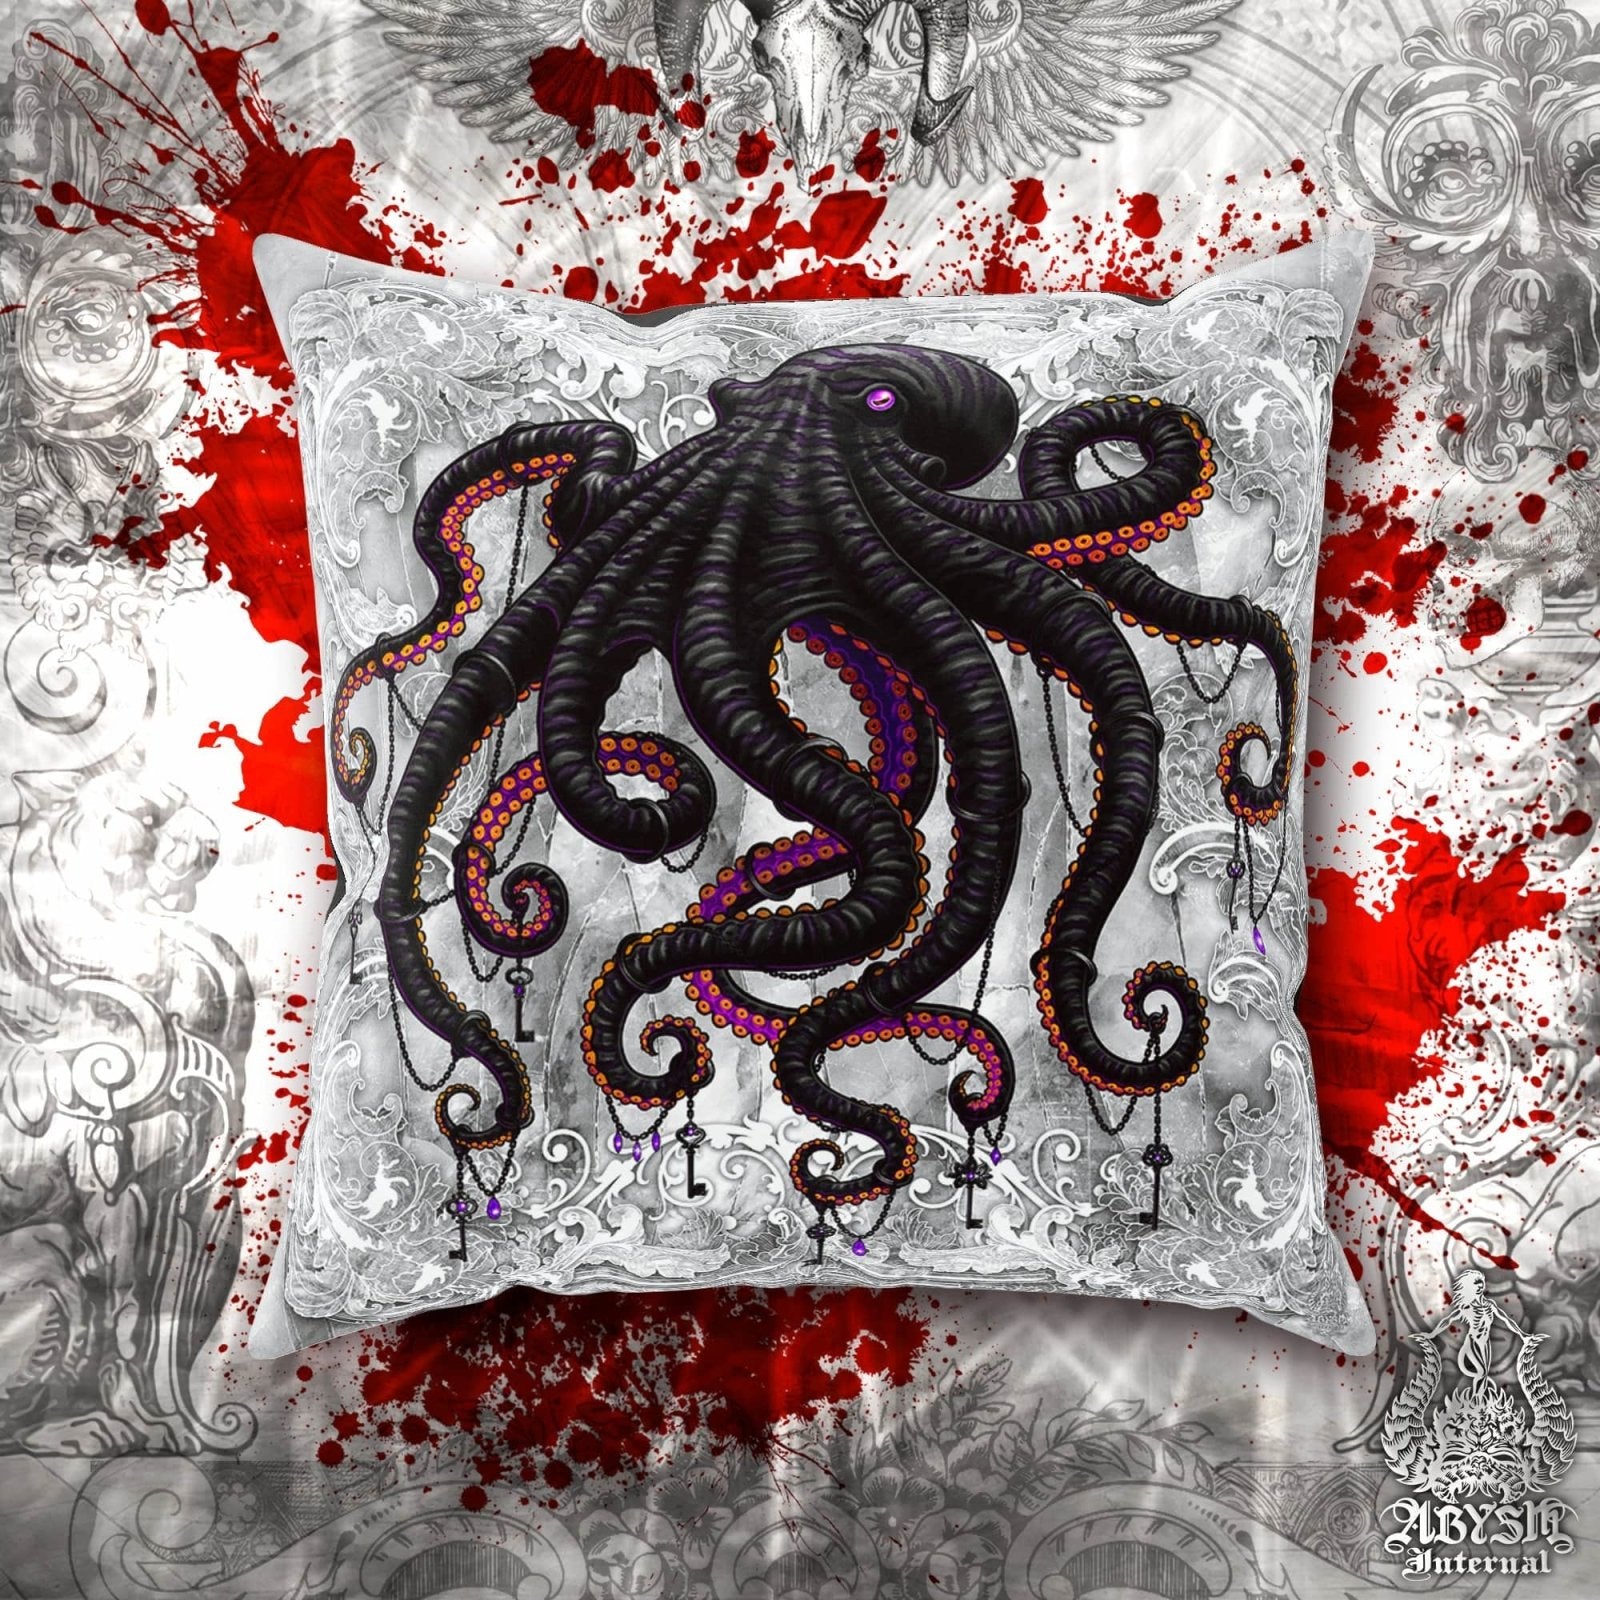 Goth Throw Pillow, Decorative Accent Pillow, Square Cushion Cover, Gothic  Room Decor, Dark Art, Alternative Home - Bloody White and Red Octopus